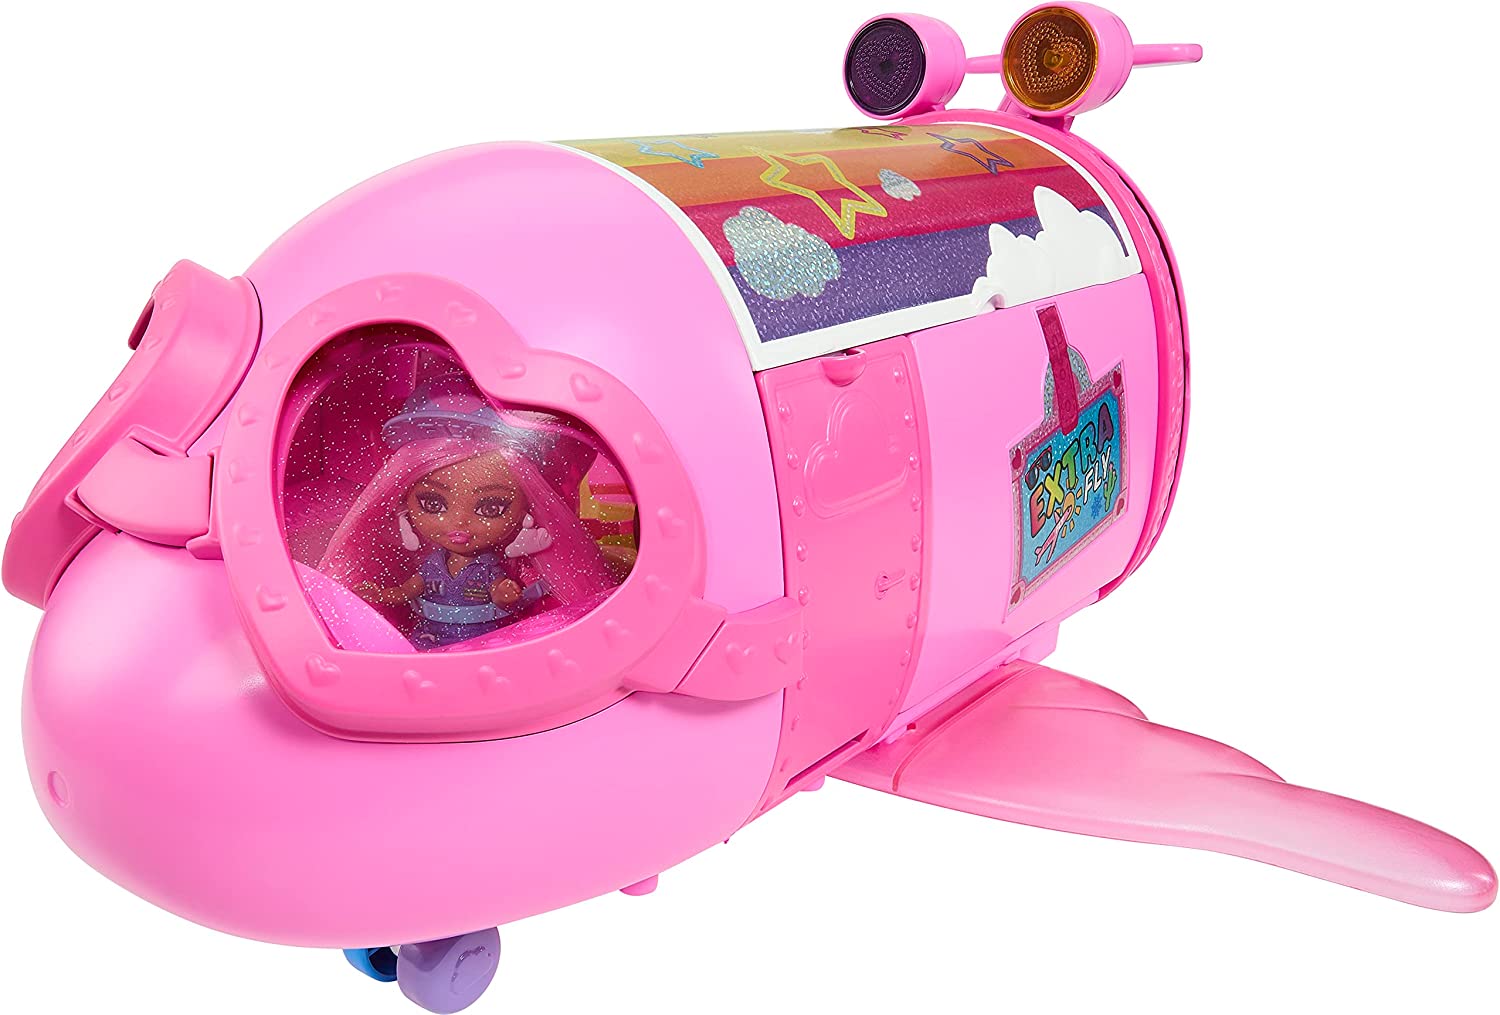 Barbie Glam Vacation Jet Plane Playset - Entertainment Earth